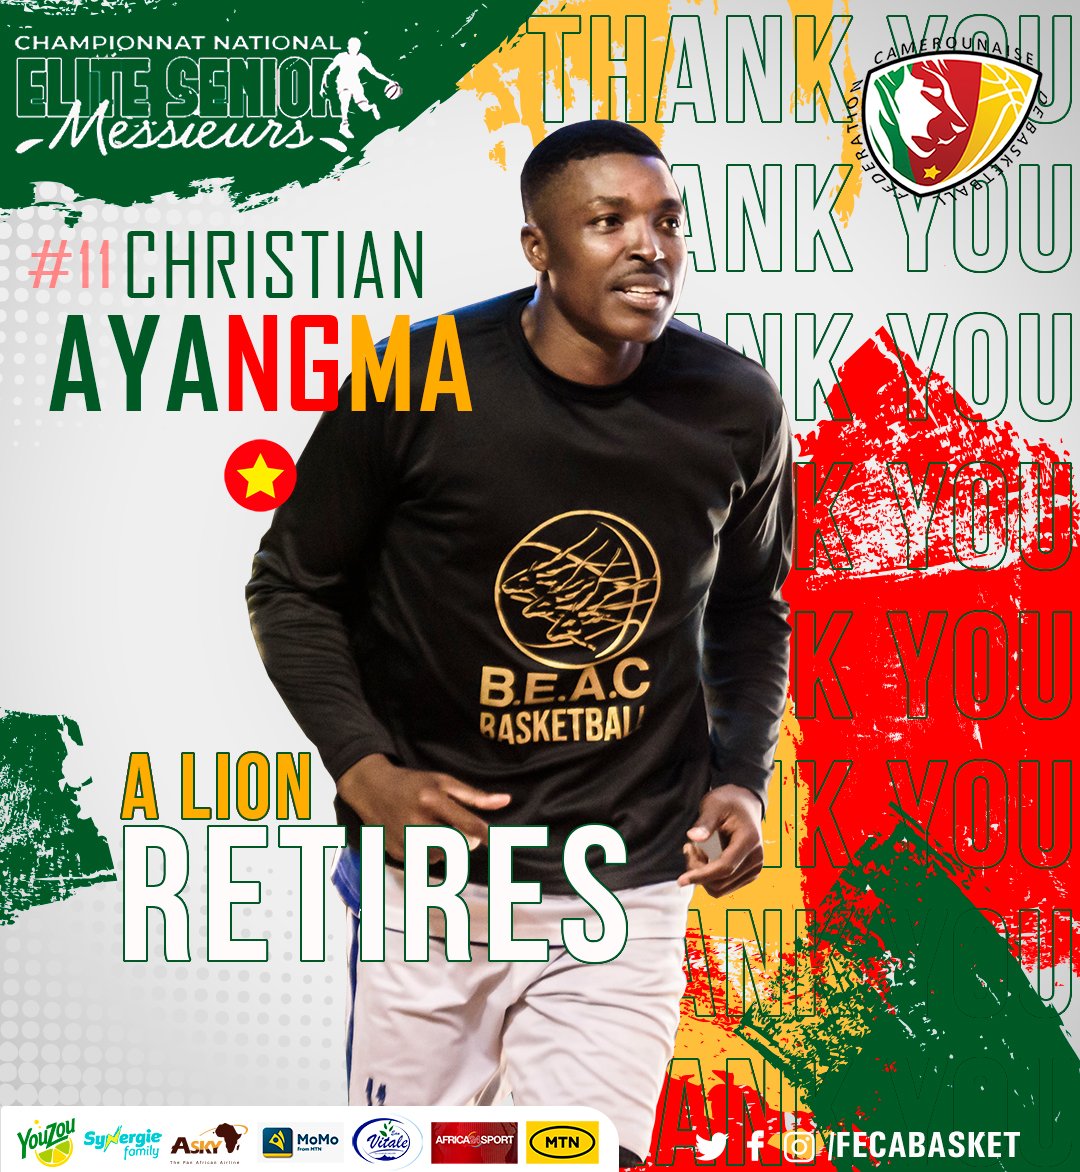 Multiples times champion of Cameroon,winner of the Cameroon cup, 3 point record holder (12/17 in a single game) and Indomitable lion Christian Ayangma , announced his retirement earlier today 0️⃣4️⃣/0️⃣9️⃣/2️⃣0️⃣2️⃣3️⃣. Thank you, lion !!!🦁 🦁 #thankyou #ZeebyeOut #teamcamer #cnesm